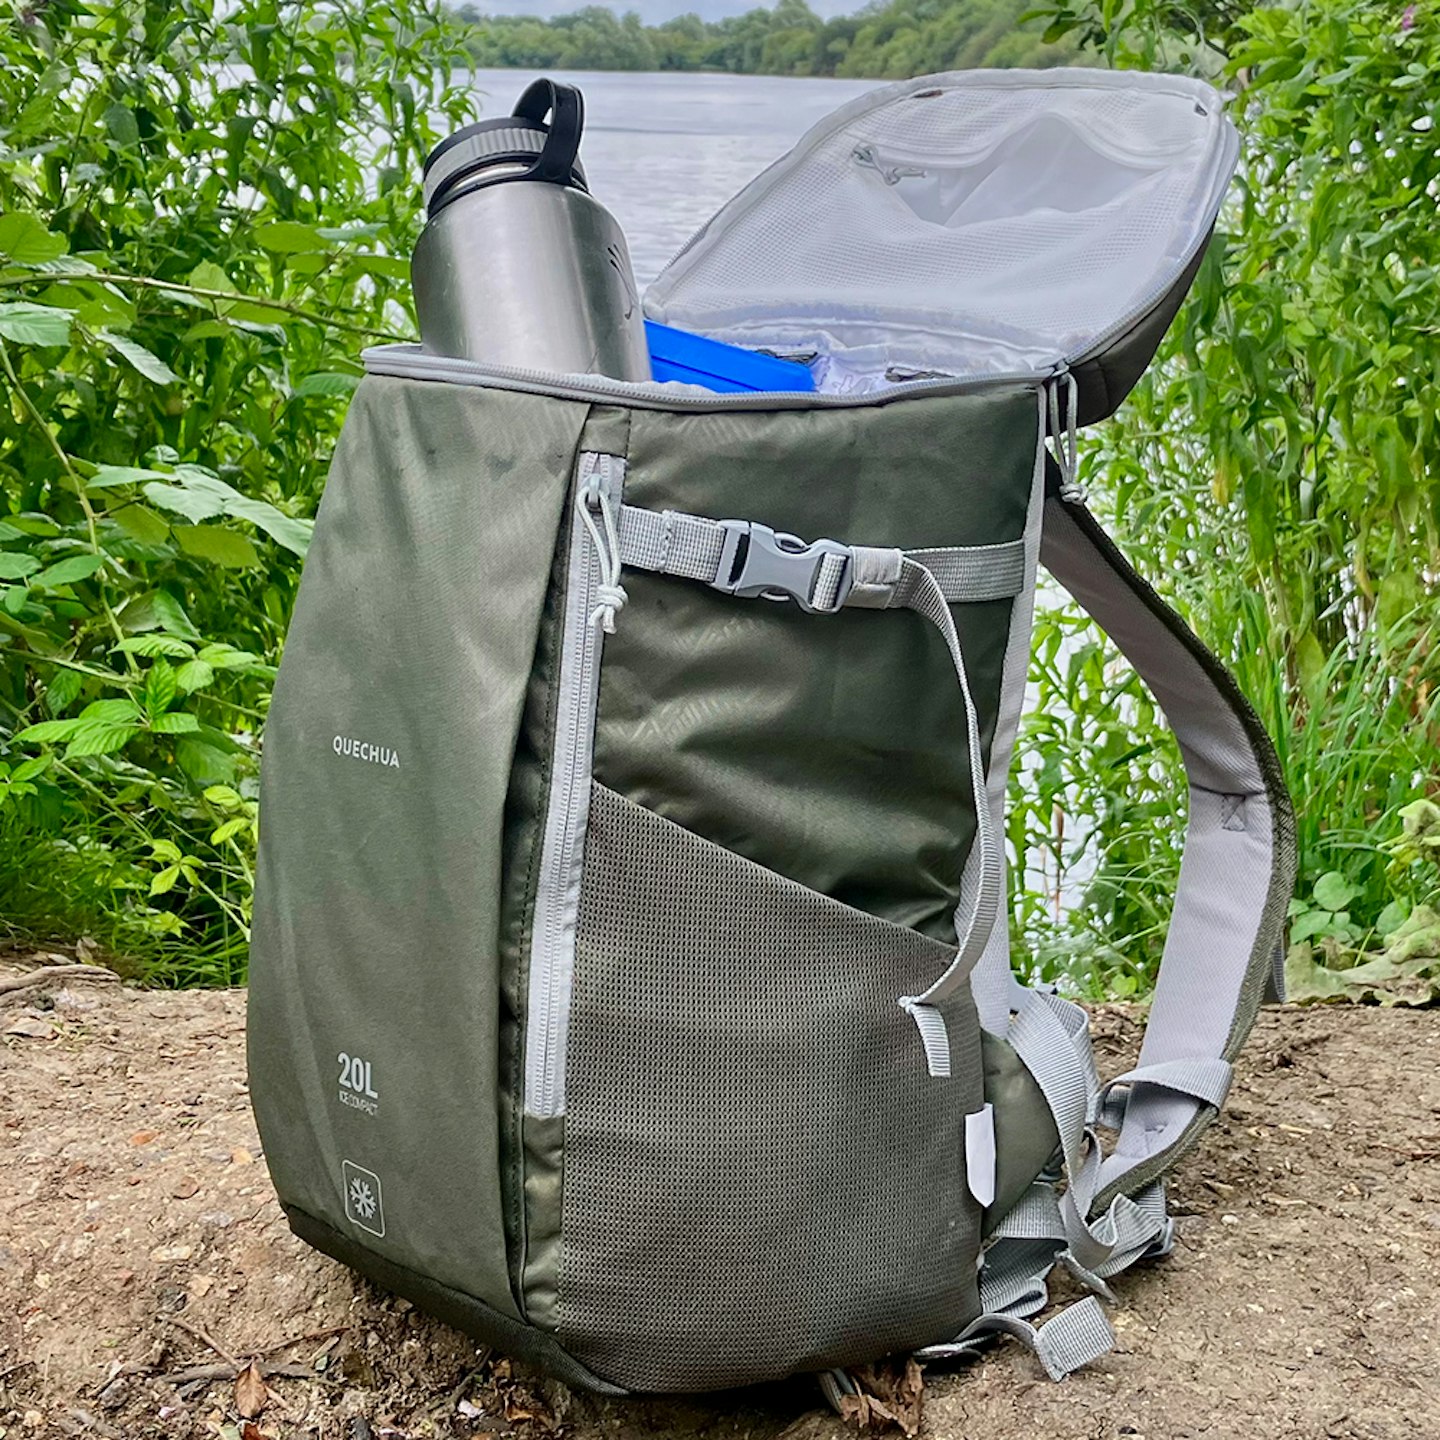 Quechua Isothermal Backpack cool bag portable reviewed